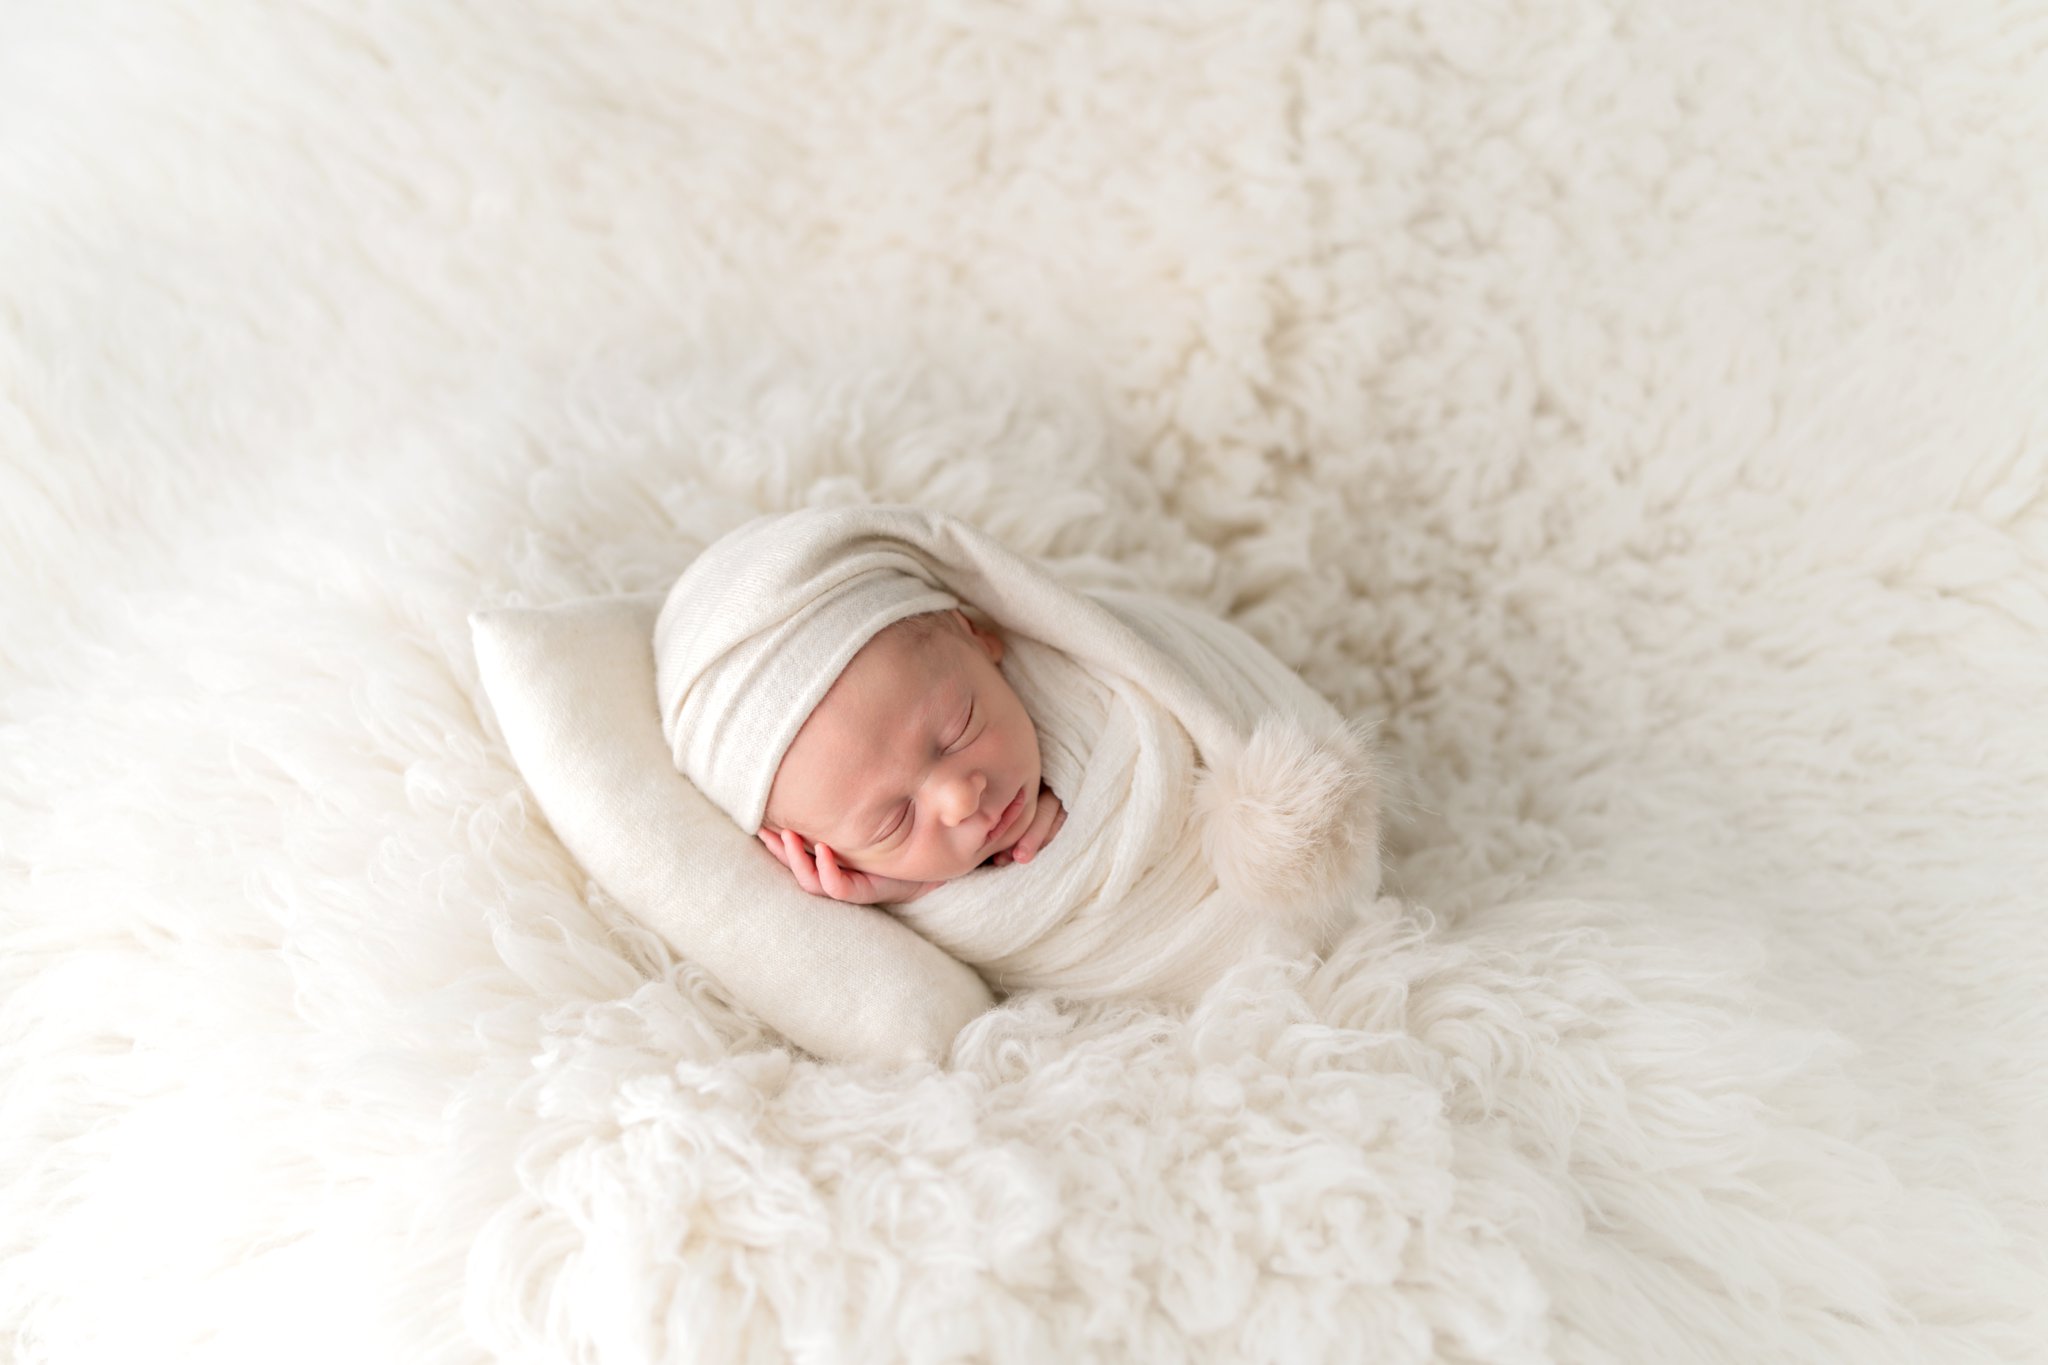 Newborn baby in off white swaddle, sleepy hat and pillow being photographed in south florida photo studio.